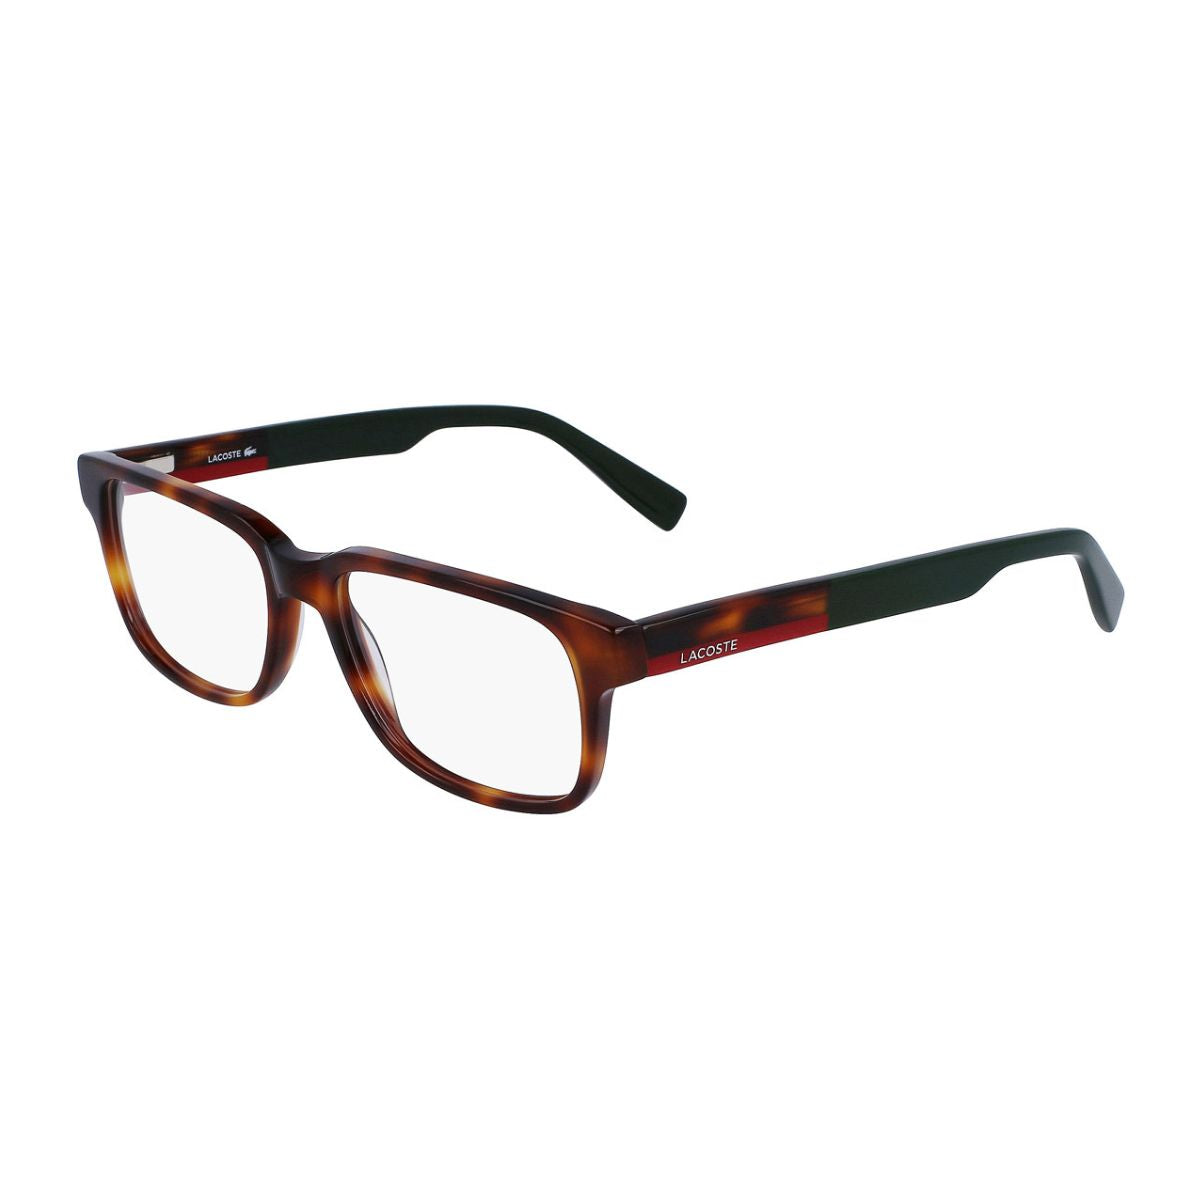 "Lacoste 2910 240 stylish brown color eyewear frame for men and women at optorium"